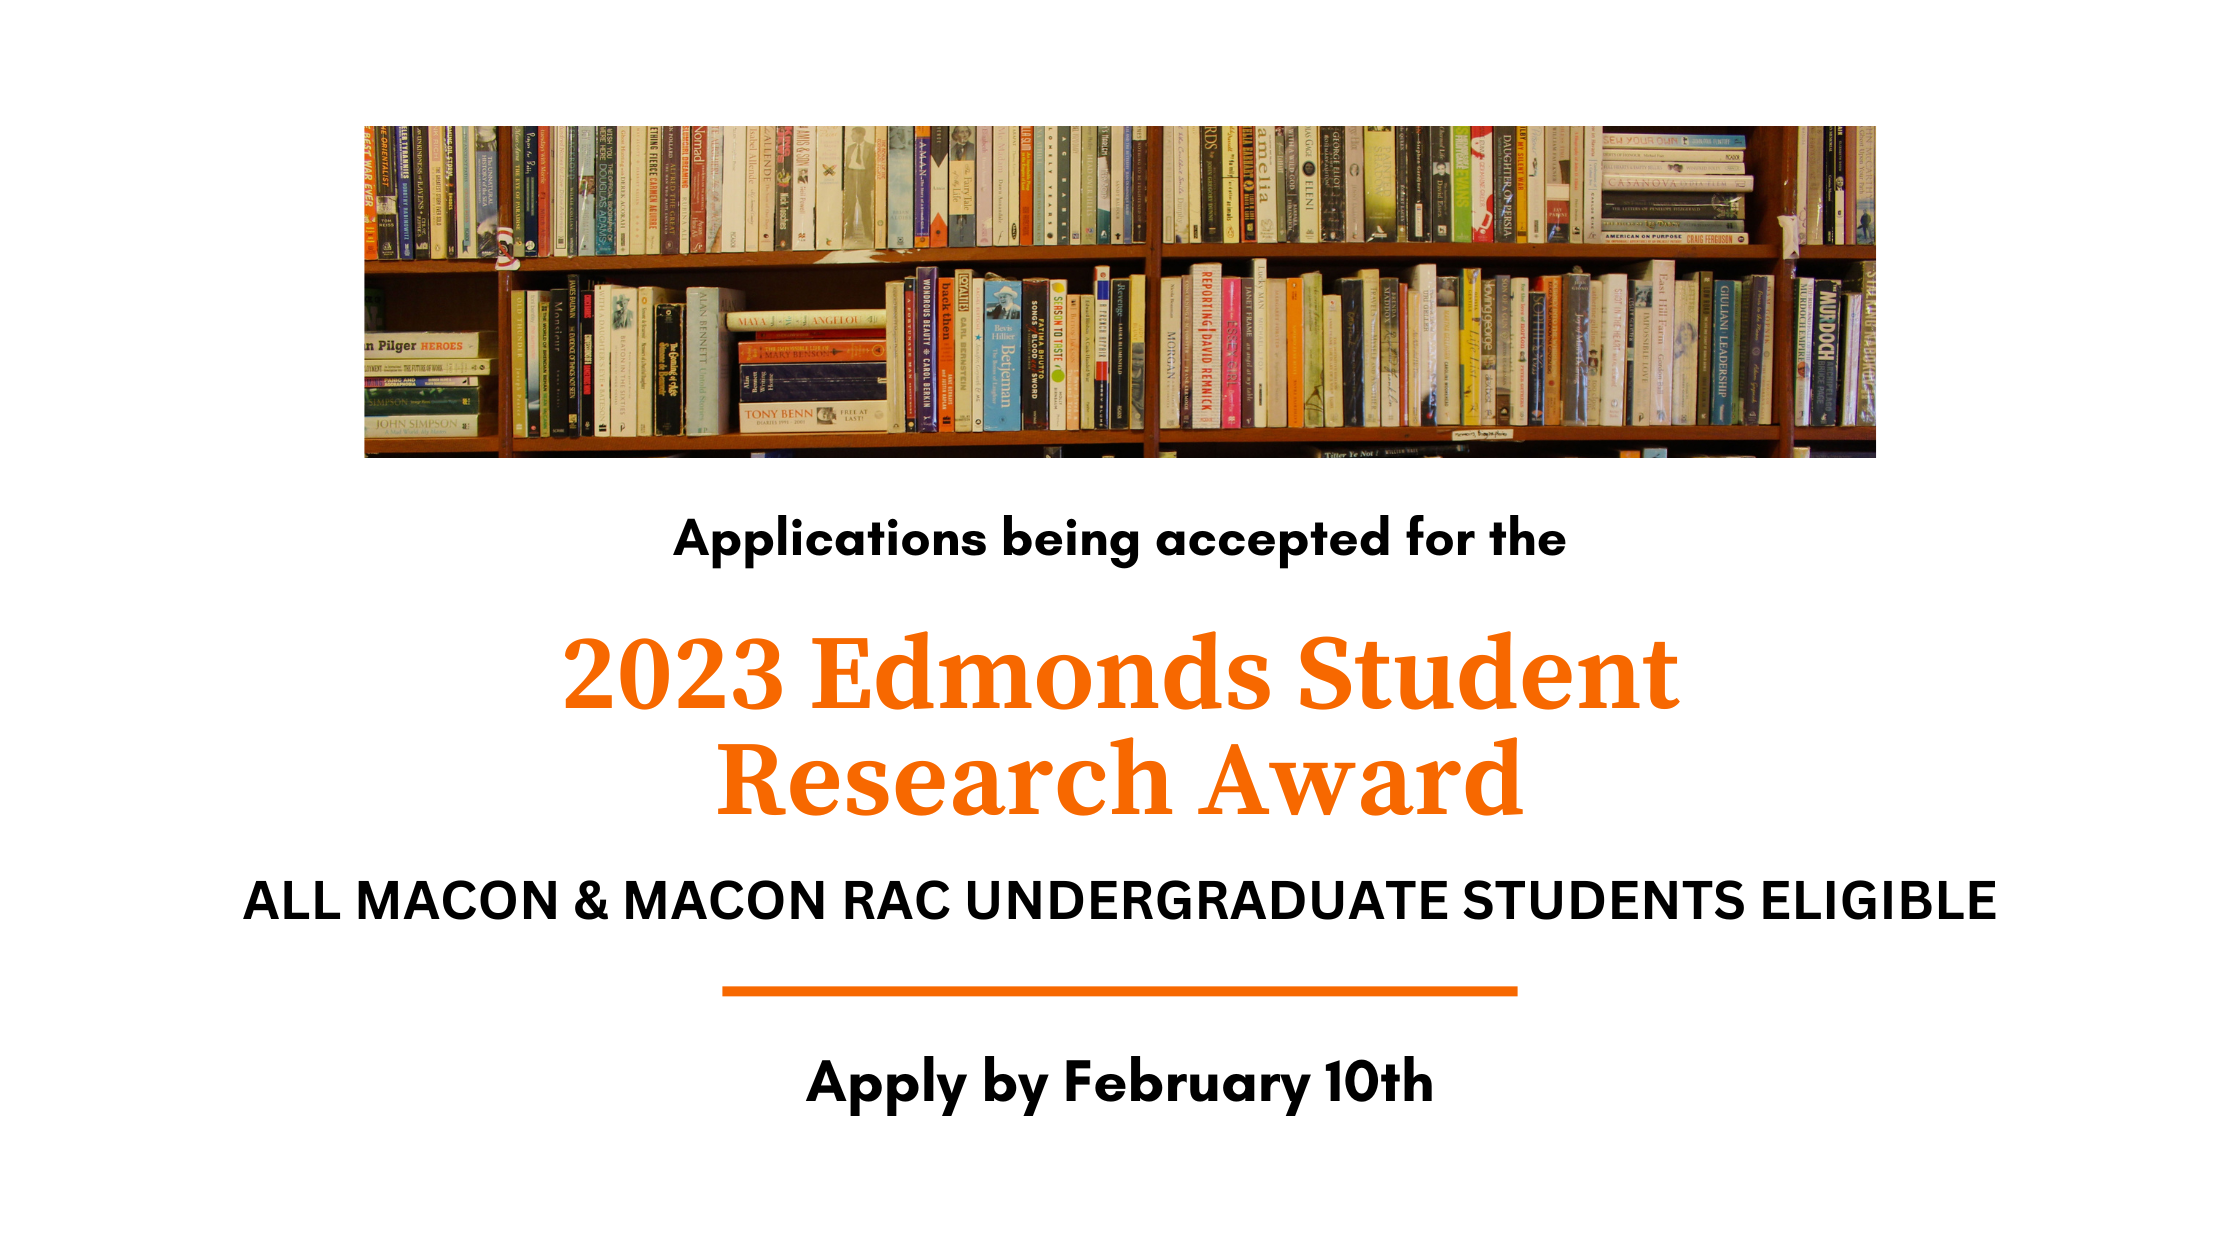 Applications being accepted for the 2023 Edmonds Student Research Award. All Macon & Macon RAC Undergraduate Students Eligible. Apply by February 10th.